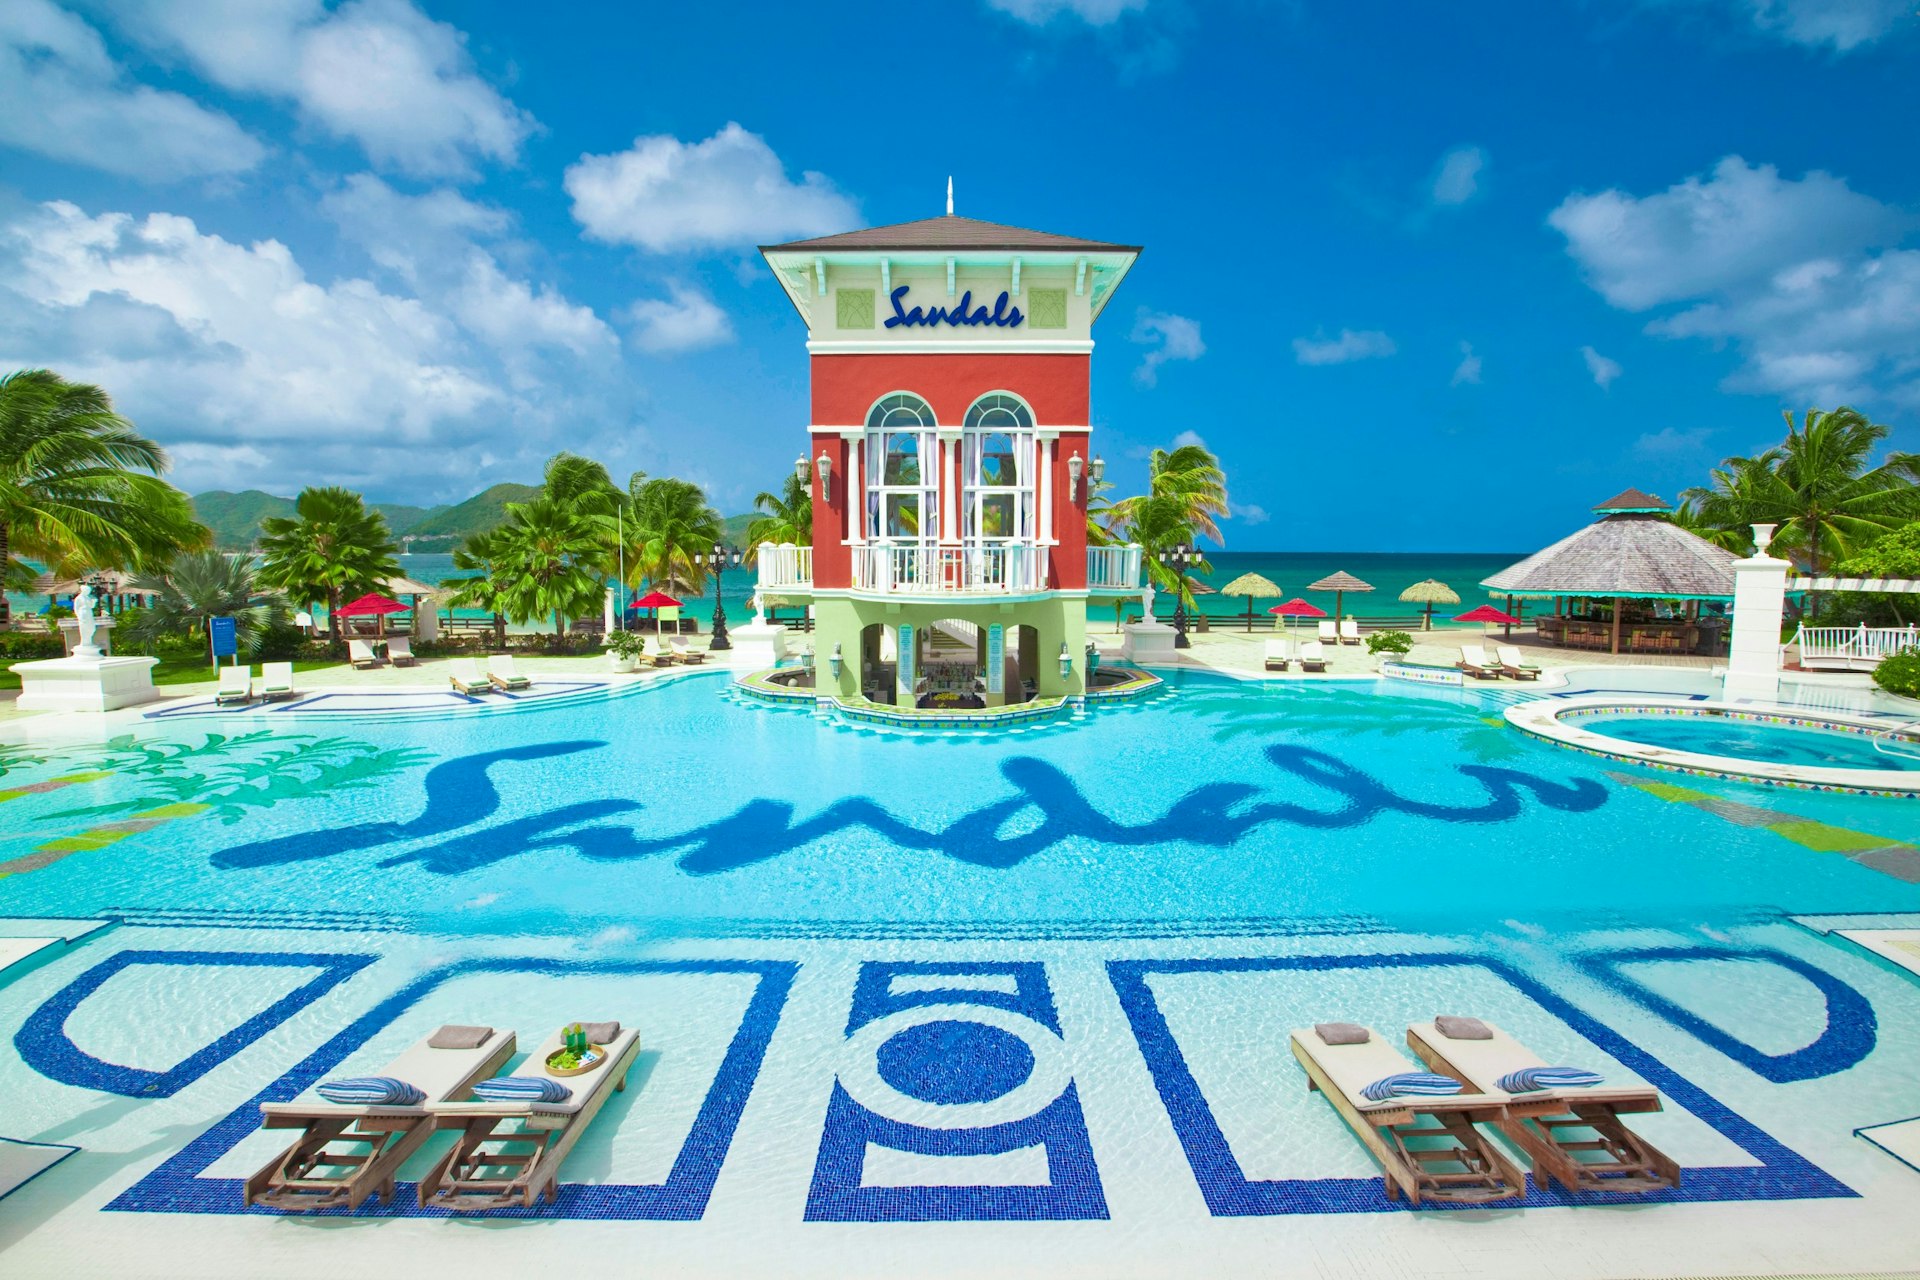 The pool at Sandals Grande St. Lucian